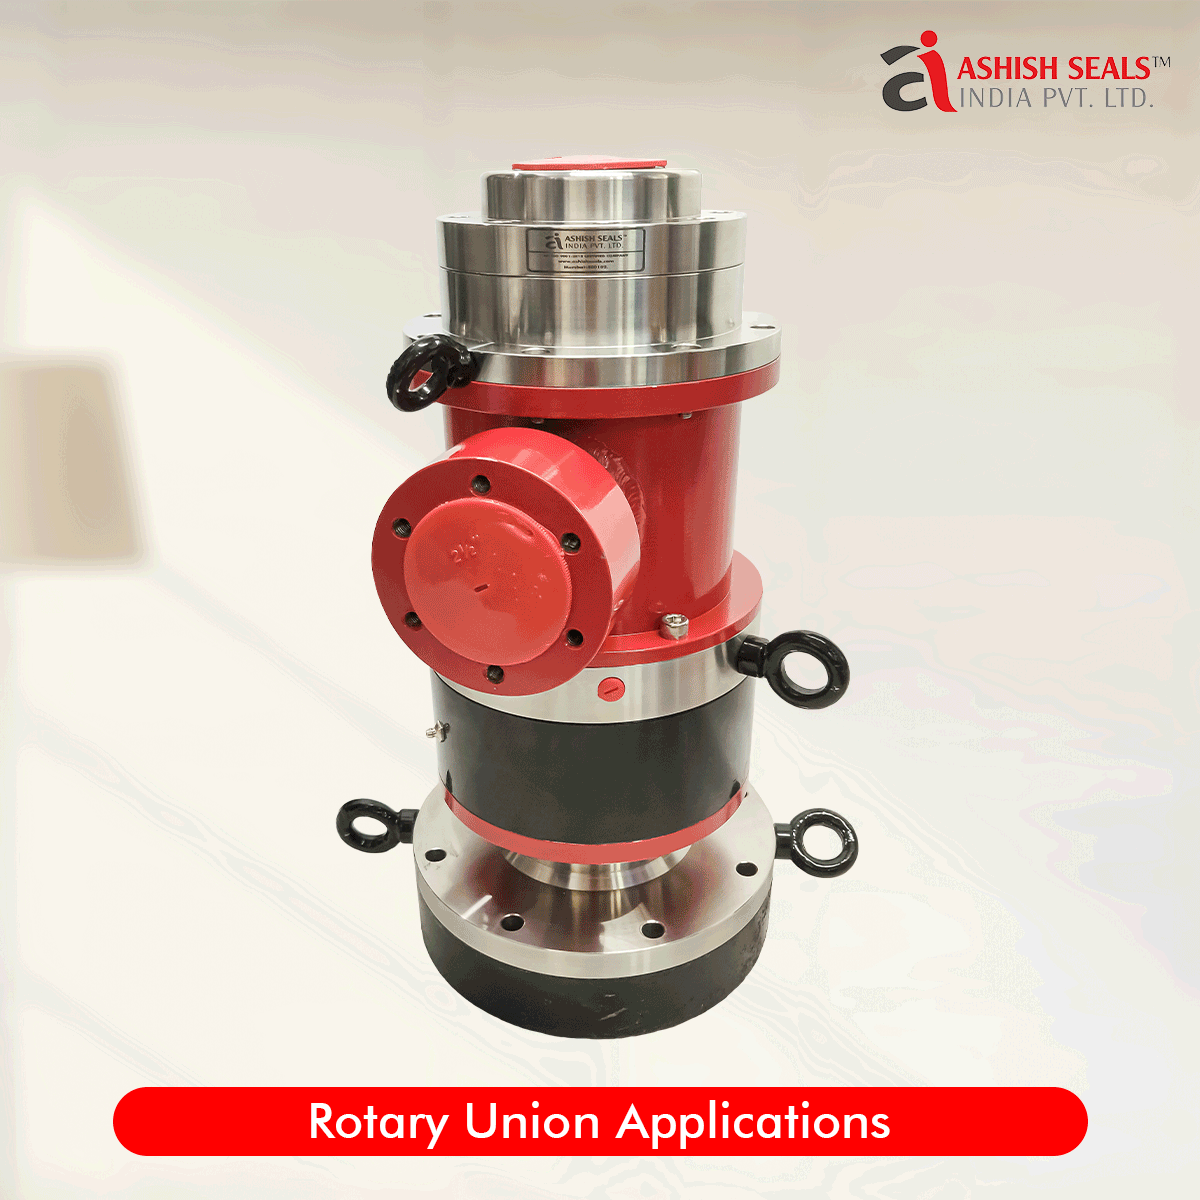 Rotary Unions Applications